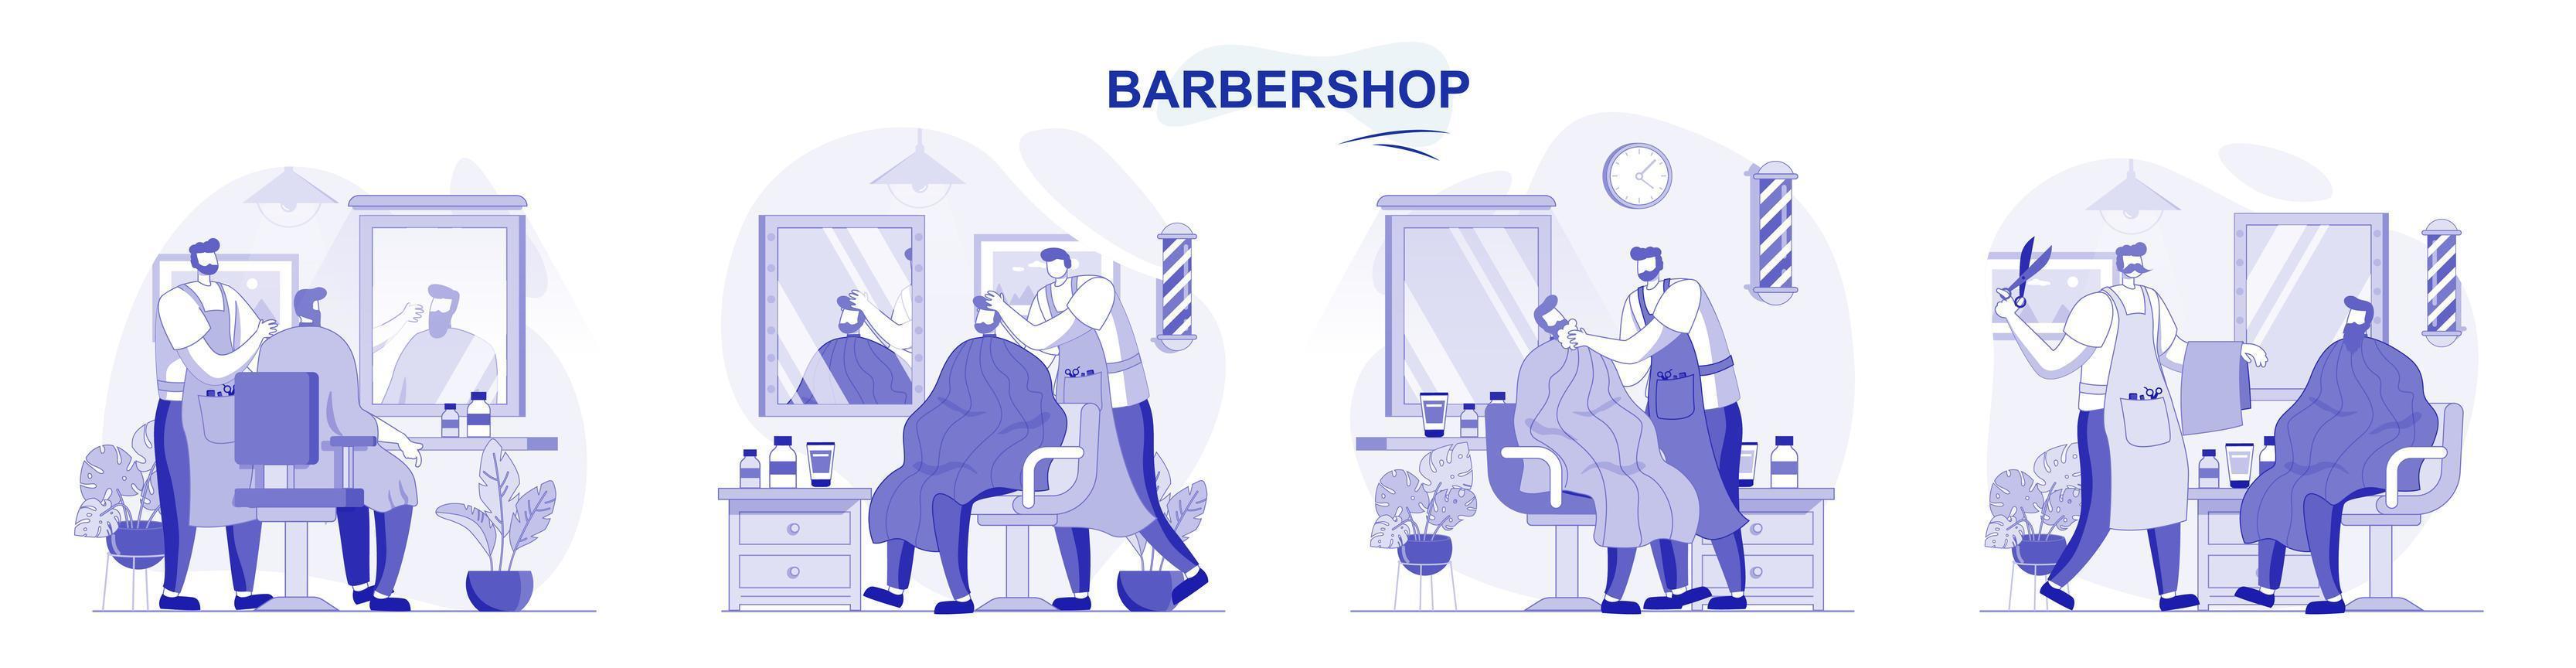 Barbershop isolated set in flat design. People get haircuts or shave beard, hairdresser does styling collection of scenes. Vector illustration for blogging, website, mobile app, promotional materials.